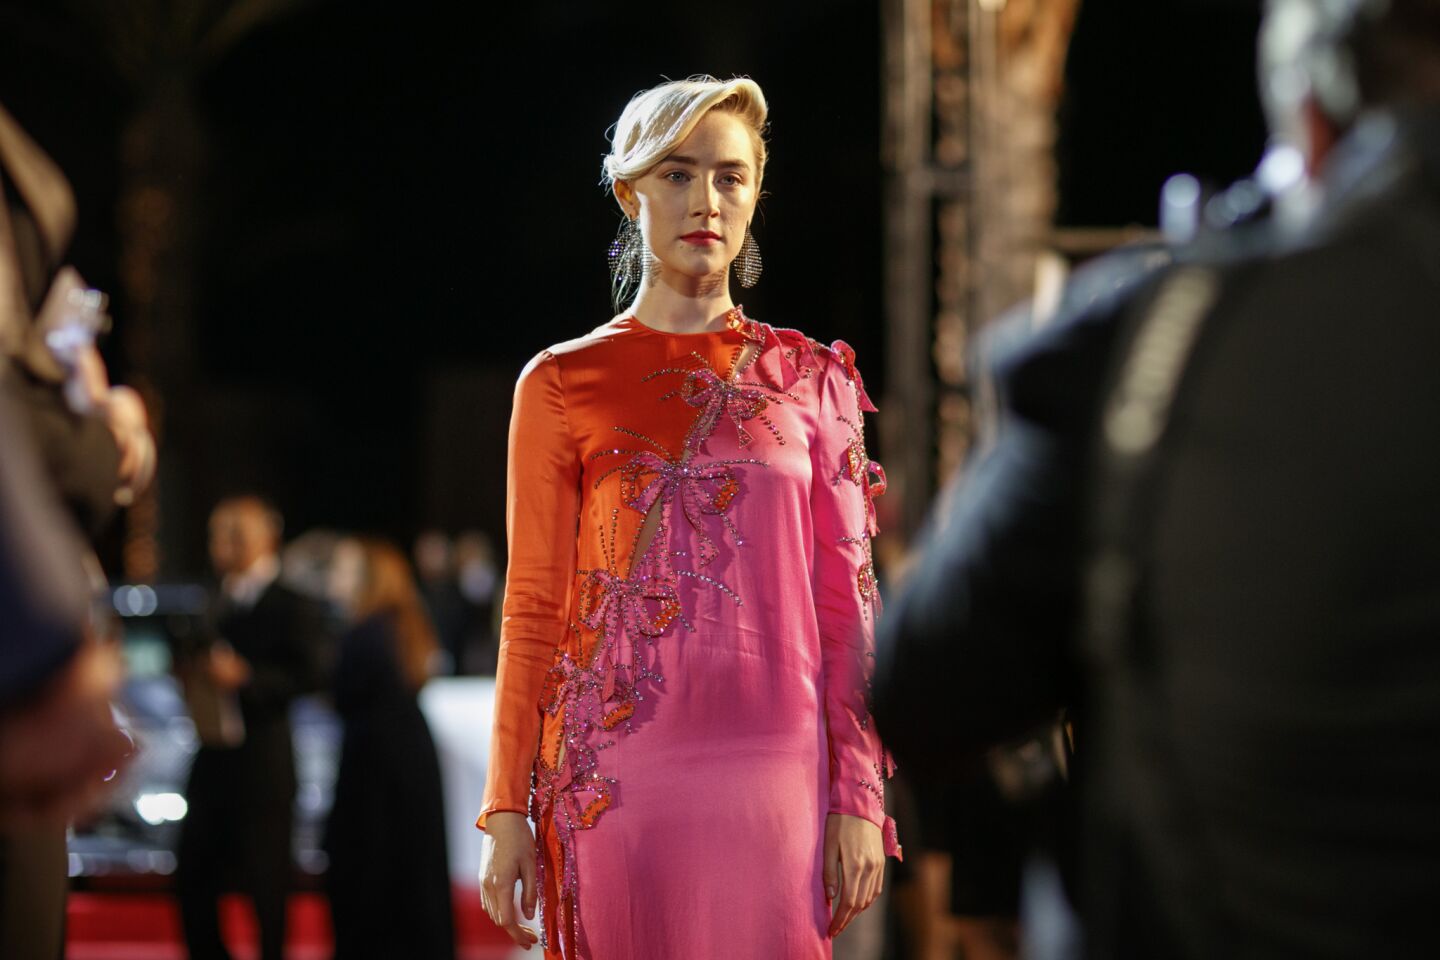 Saoirse Ronan walks the red carpet of the 18th annual Palm Springs International Film Festival Gala. Ronan received the Desert Palm Achievement Award for her work on "Lady Bird."